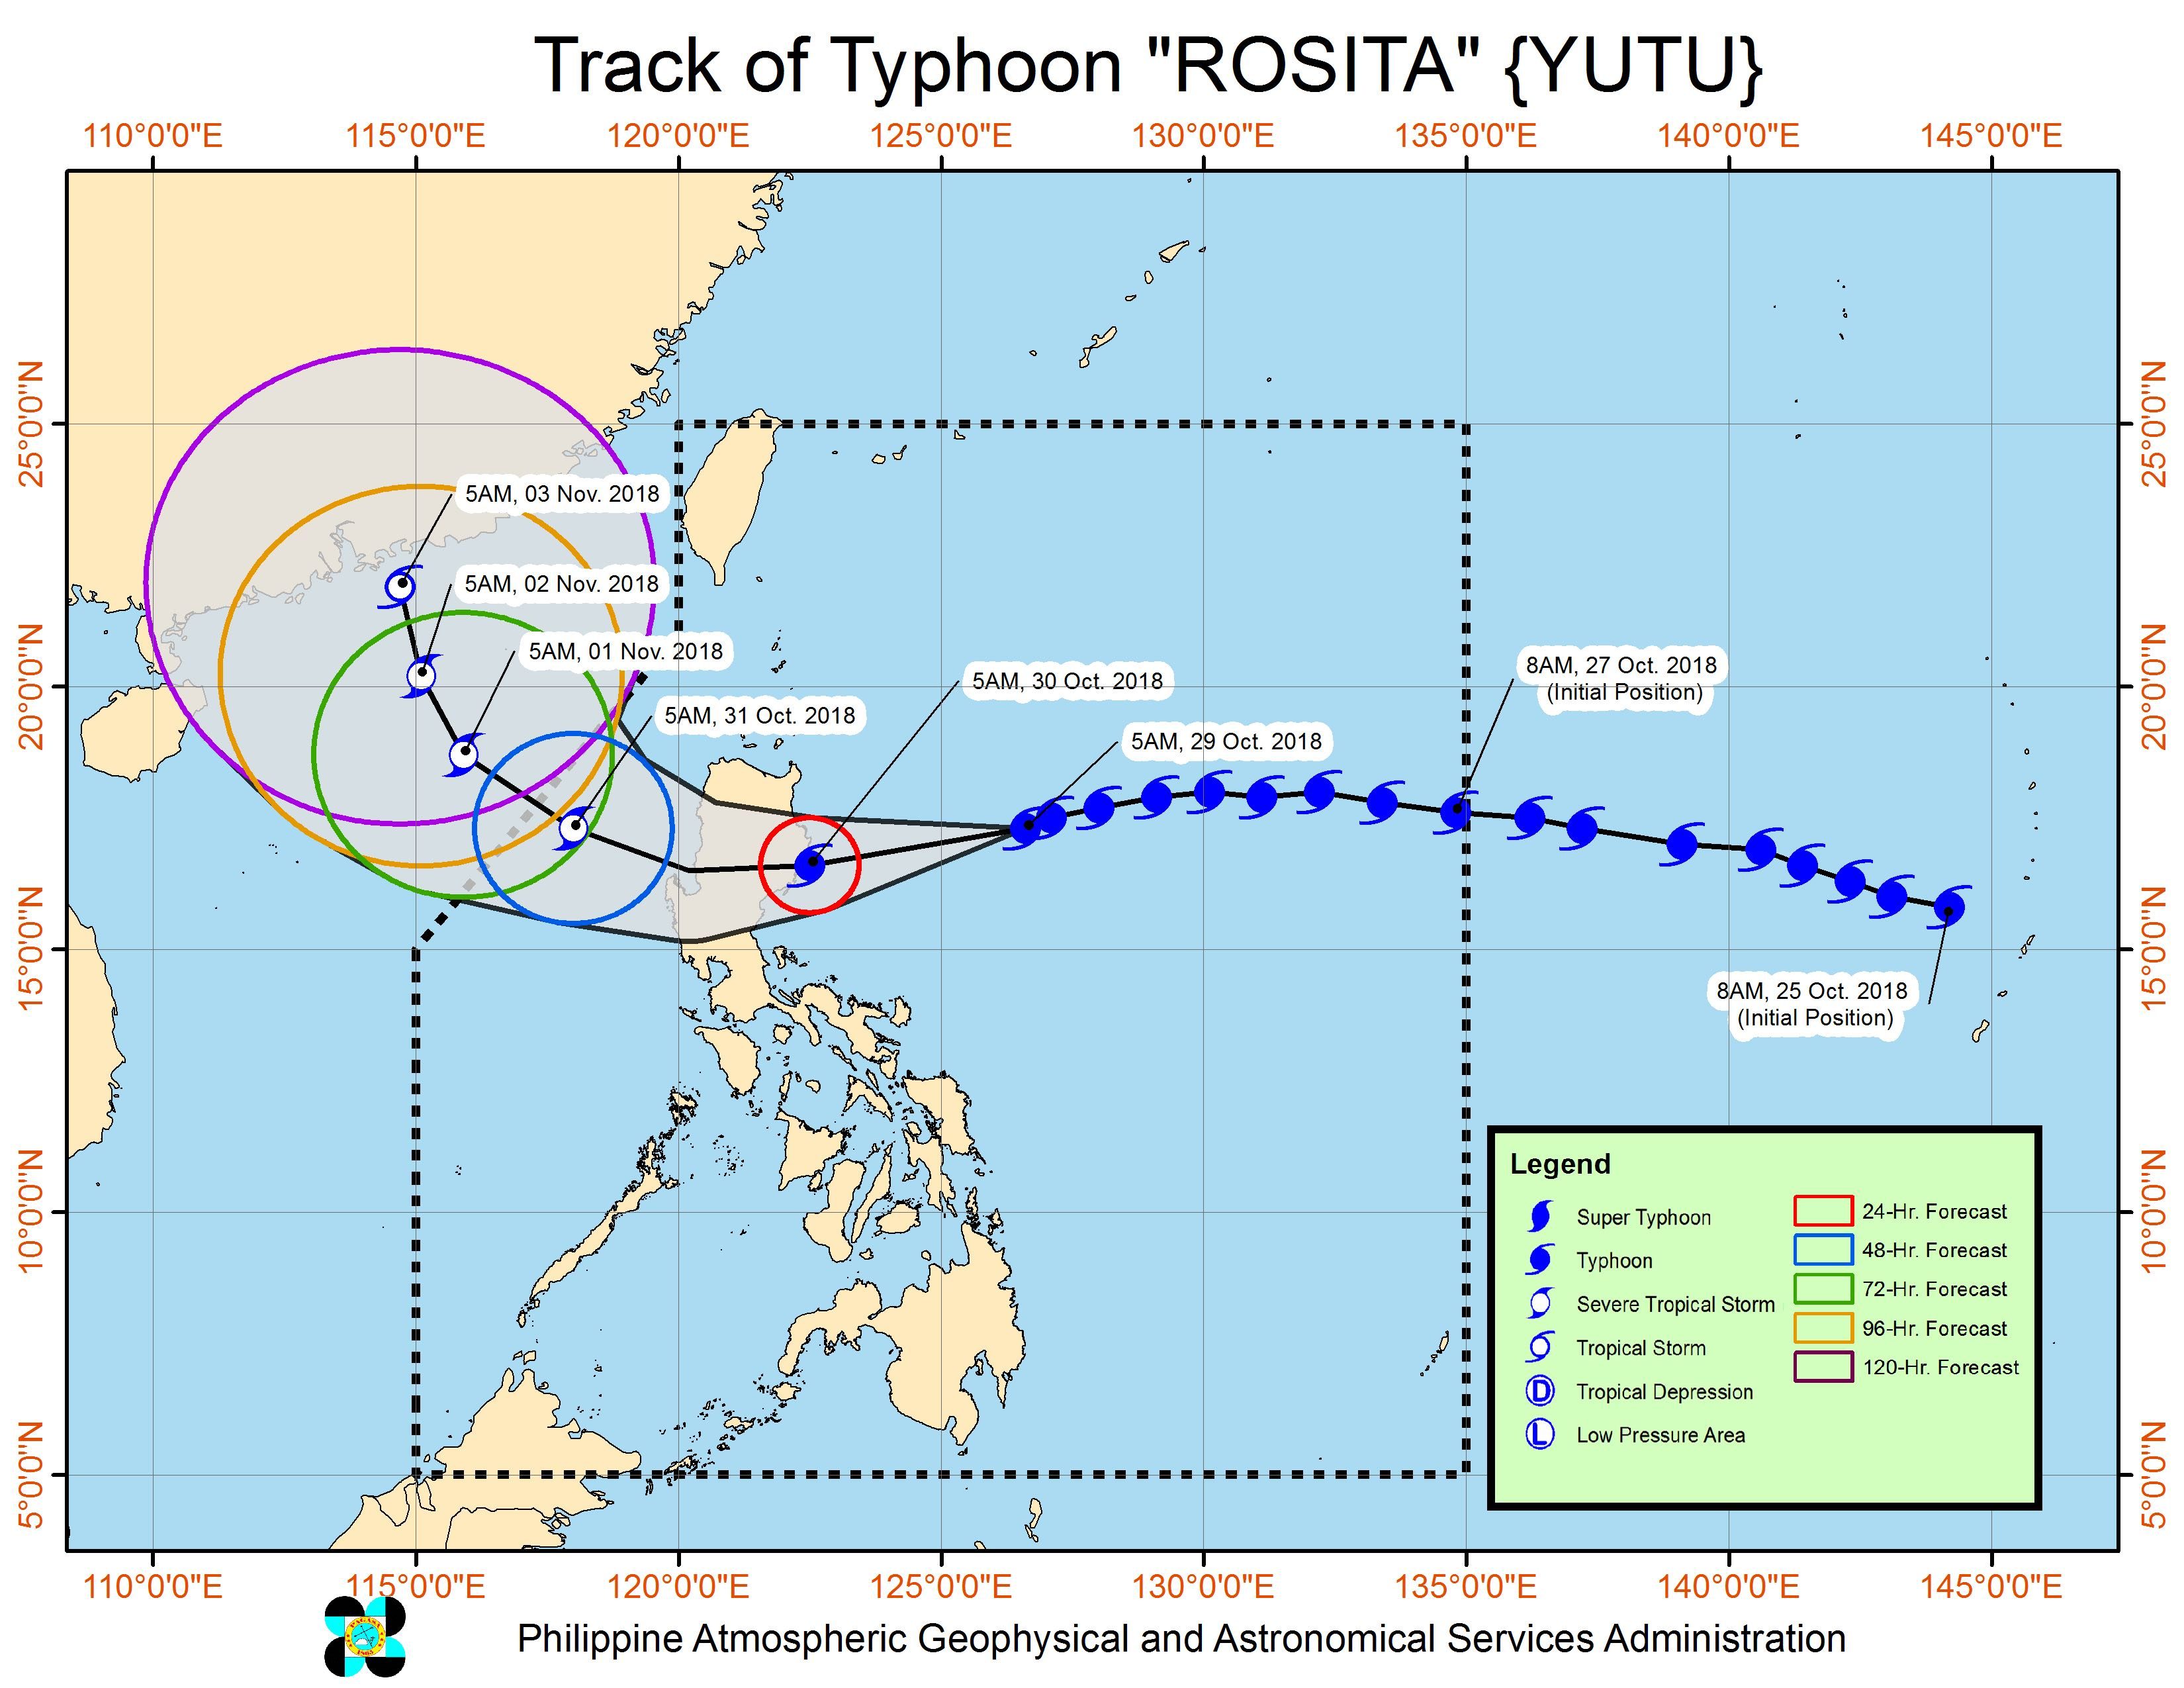 Forecast track of Typhoon Rosita (Yutu) as of October 29, 2018, 8 am. Image from PAGASA 